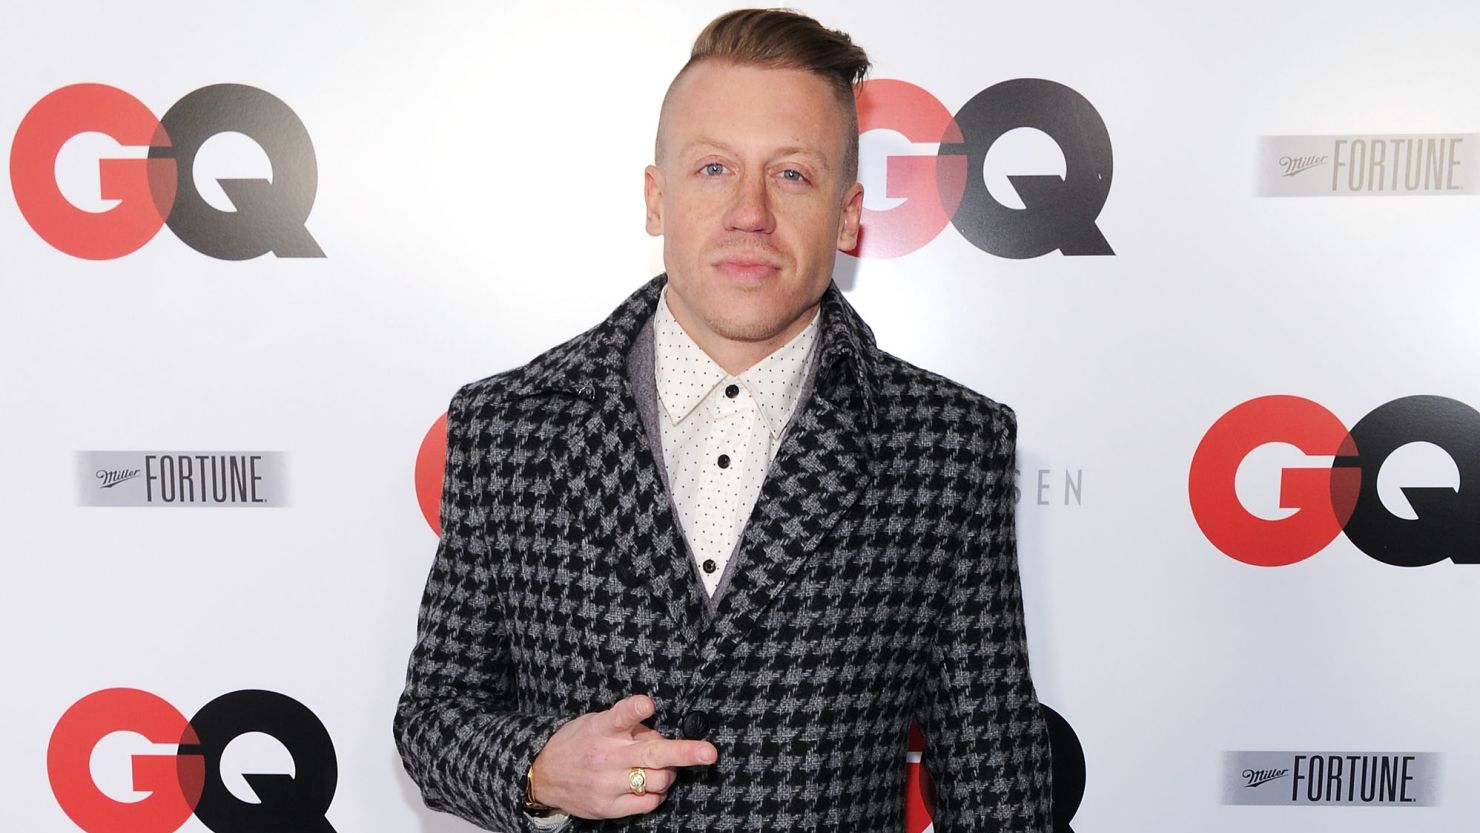 Macklemore's new song "White Privilege II" is drawing praise in some quarters and derision in others.
